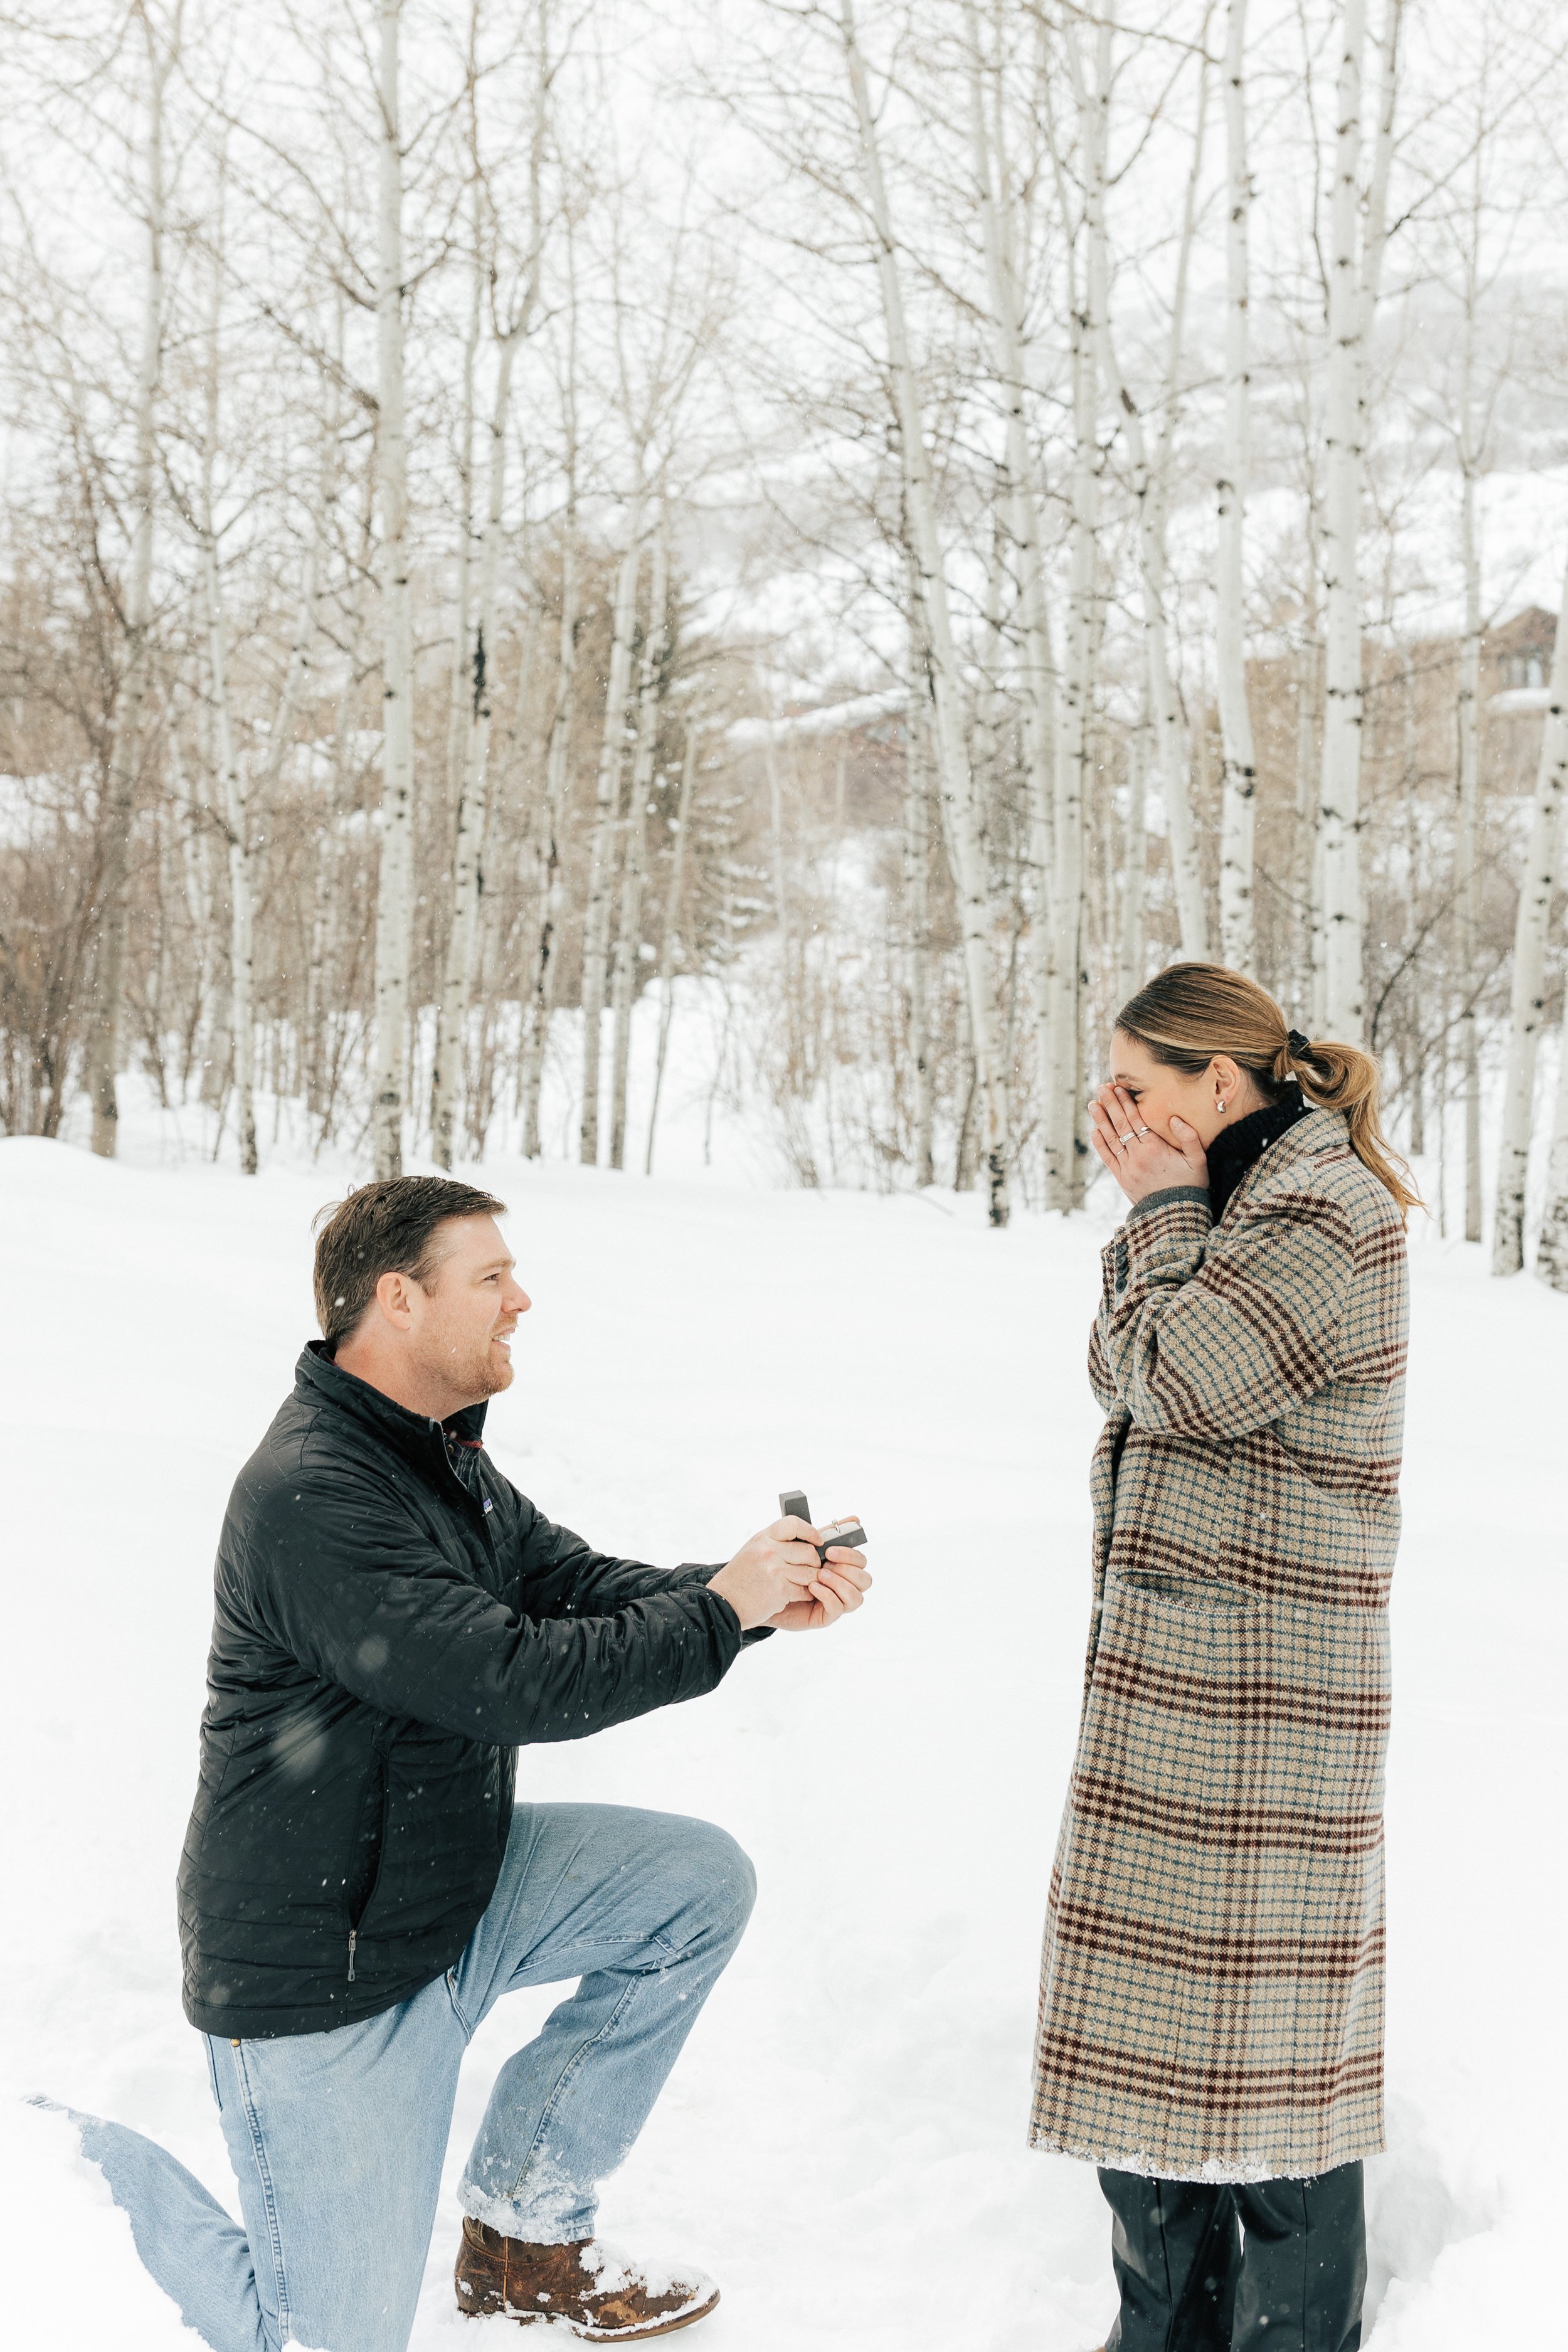  Winter engagement session in Park City, Utah. Boyfriend surprises girlfriend with wedding proposal during a snowy photoshoot. Man proposing to his girlfriend. #parkcity #engagements #engagementsessionn #proposal 